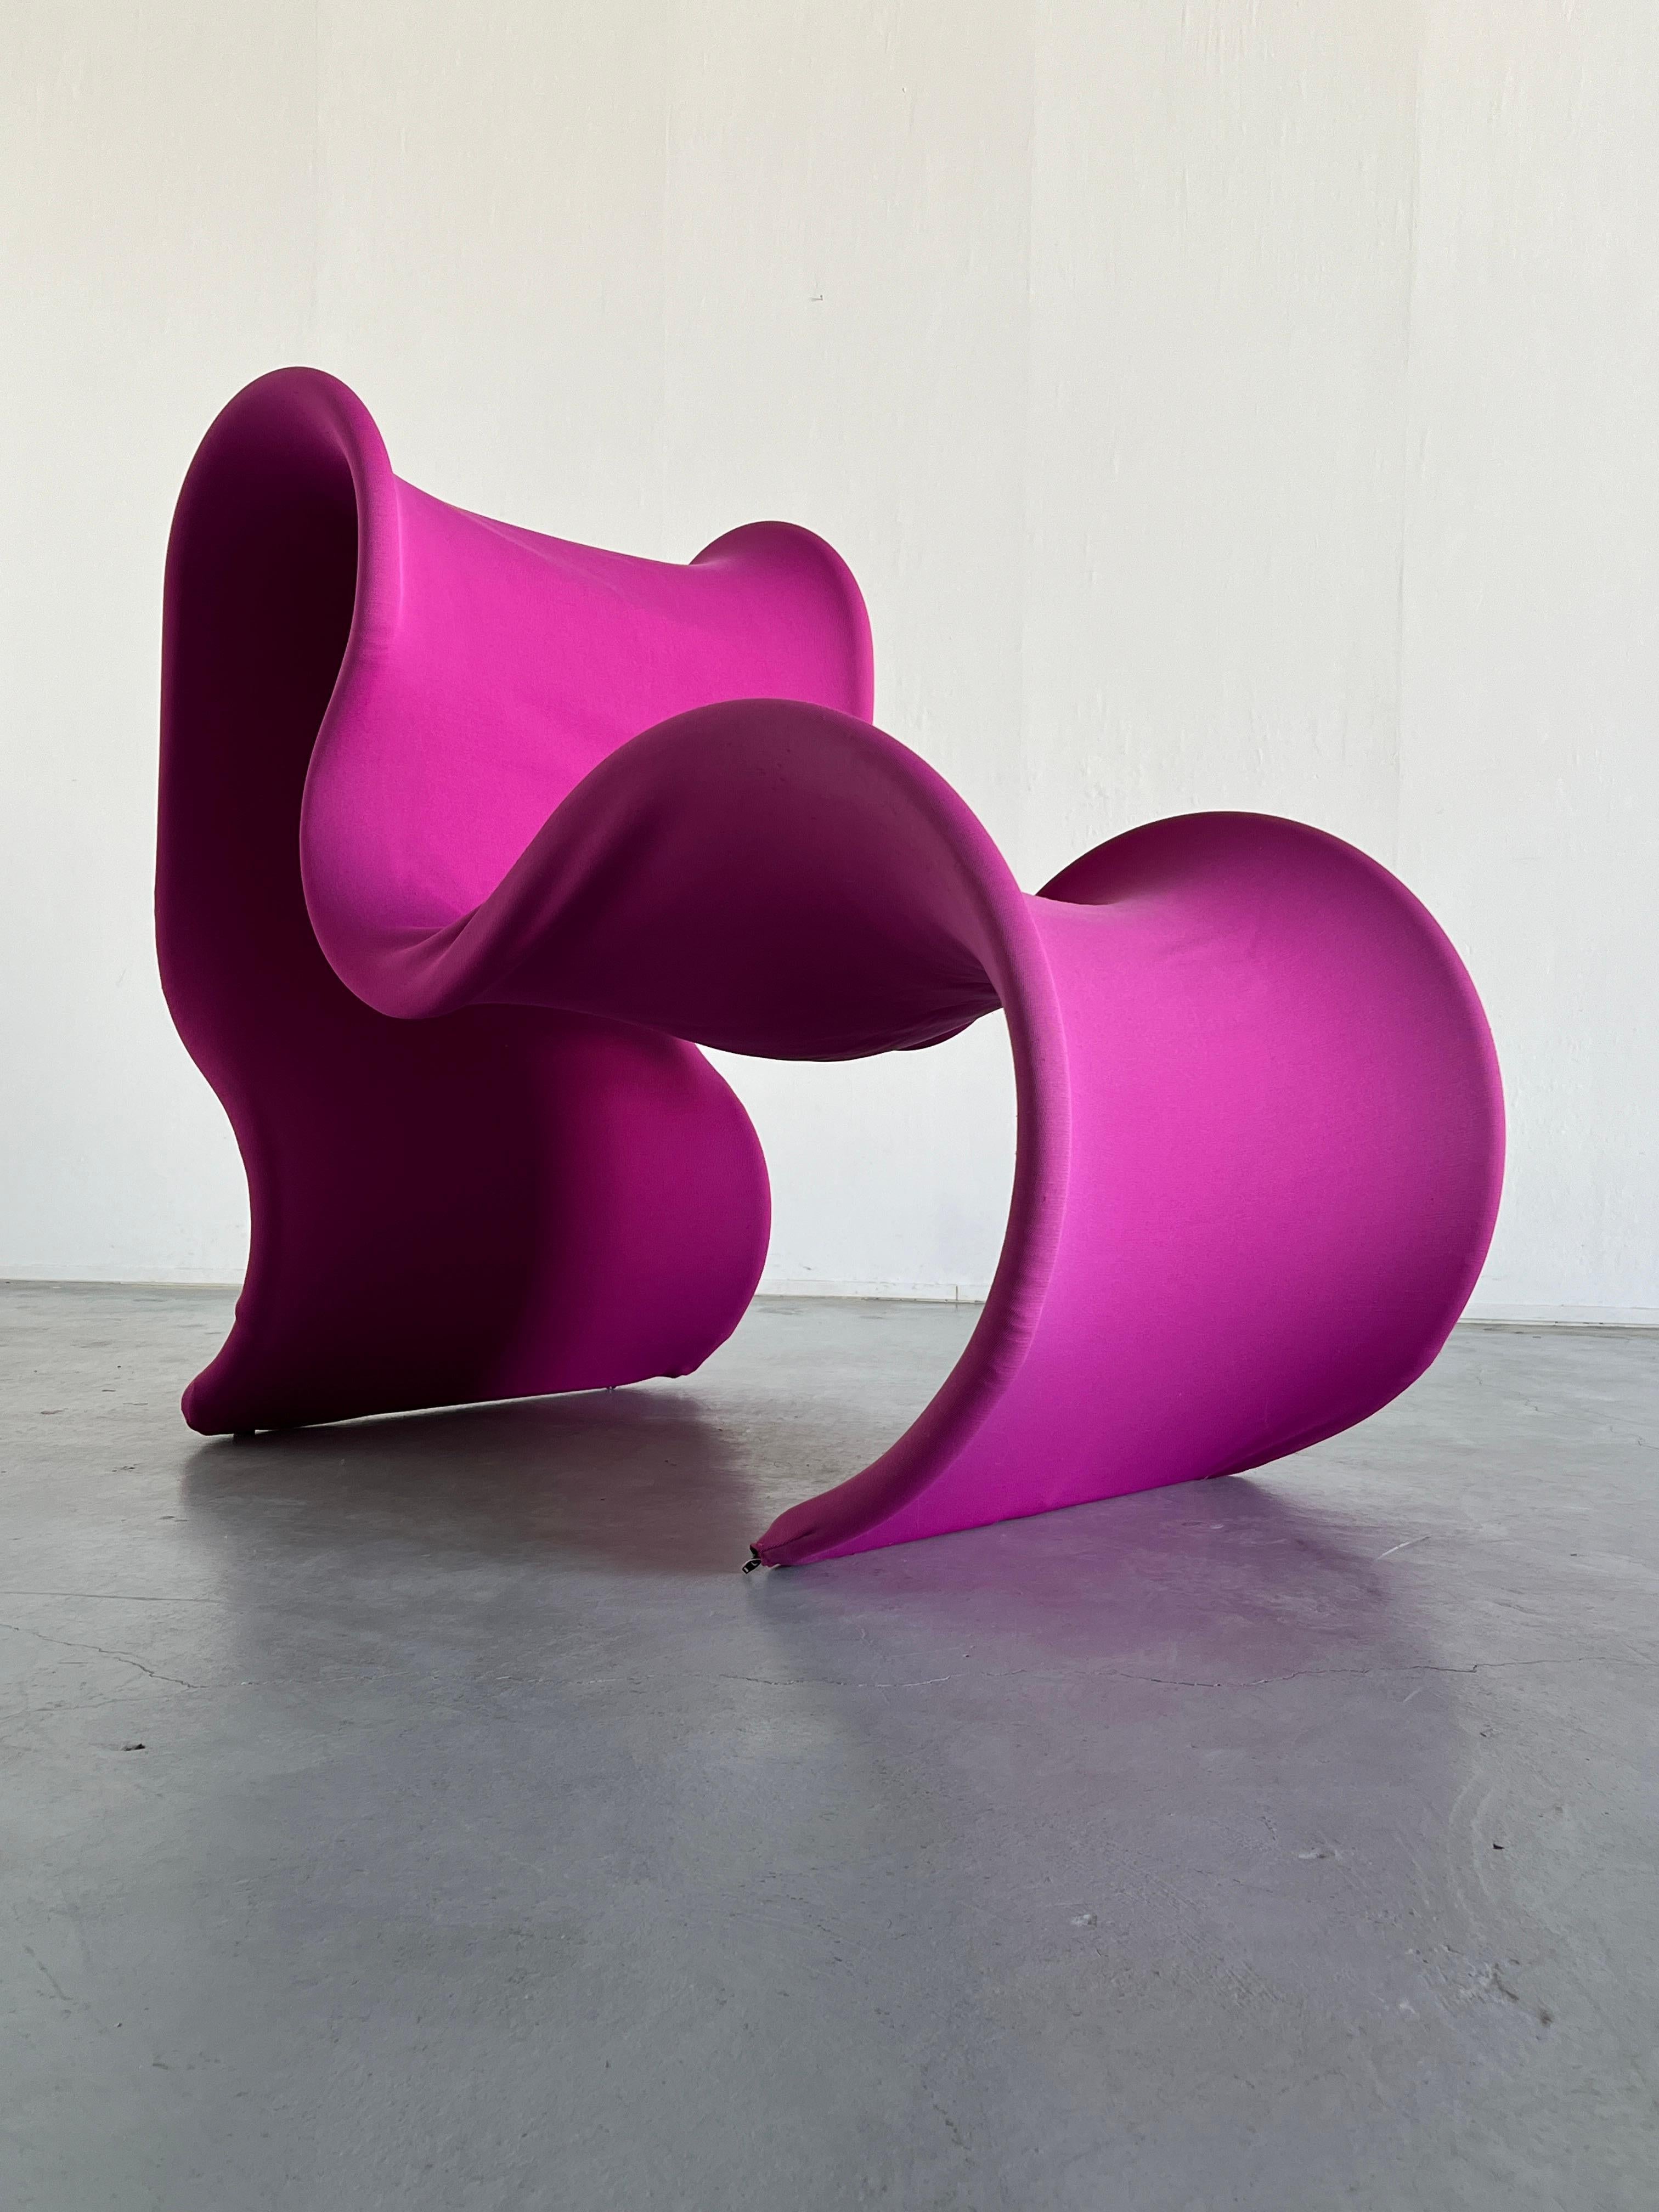 Space Age Large Fiocco Armchair by Gianni Pareschi for Busnelli in Pink, 1970s For Sale